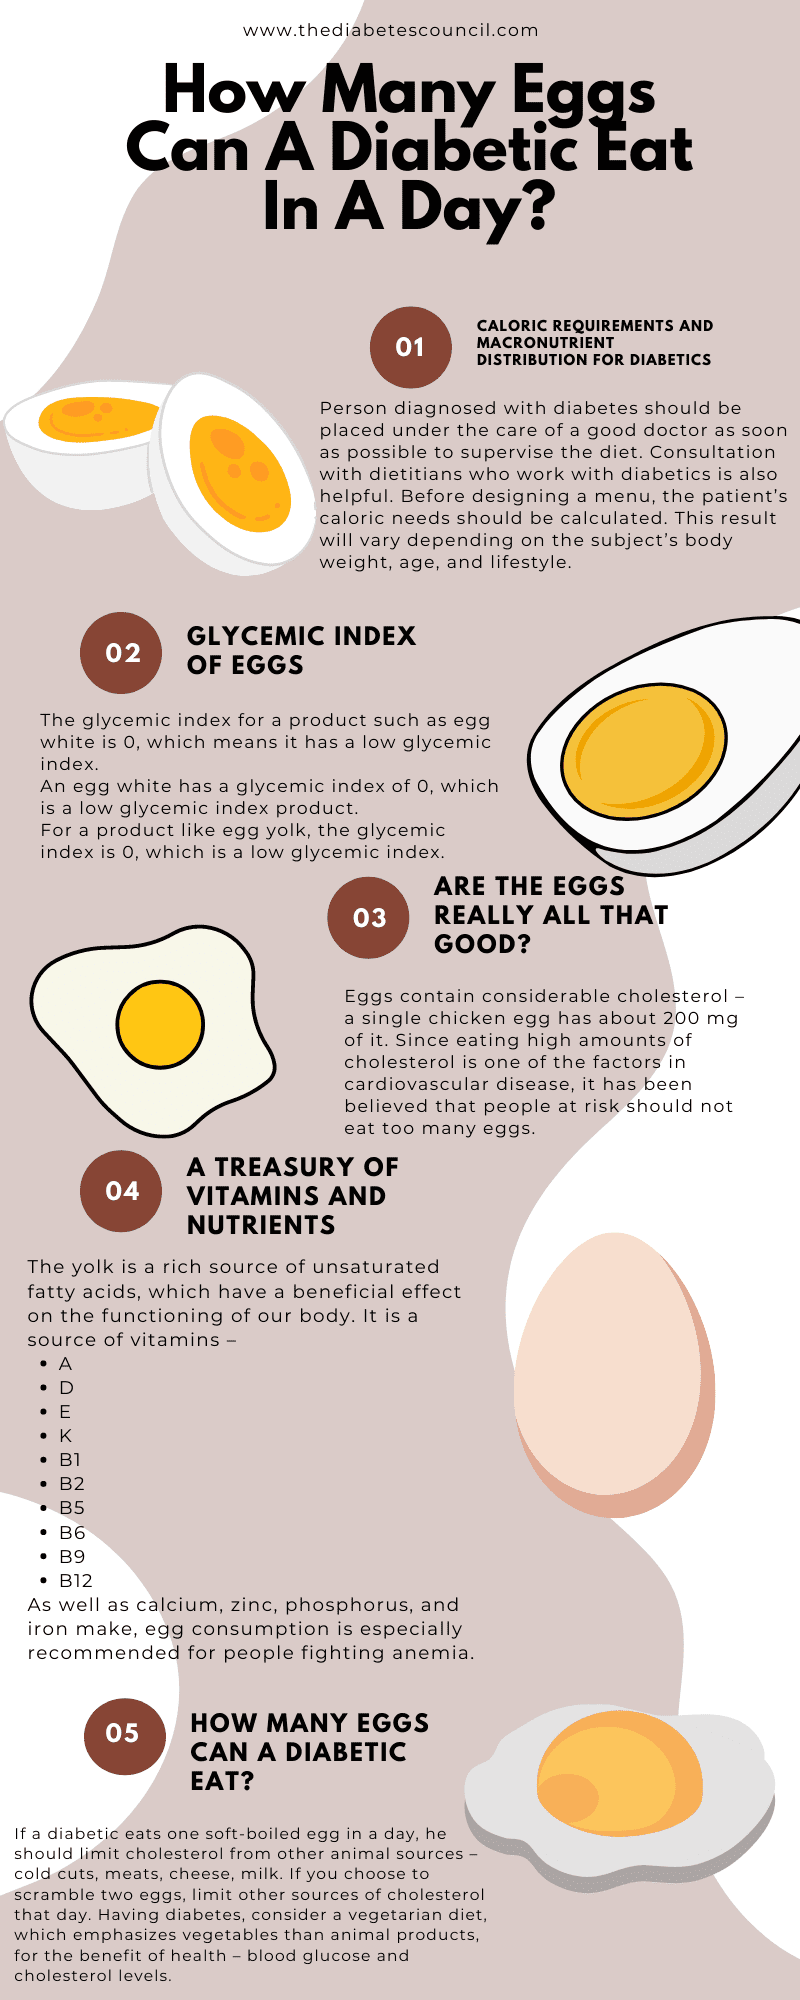 eggs and diabetes